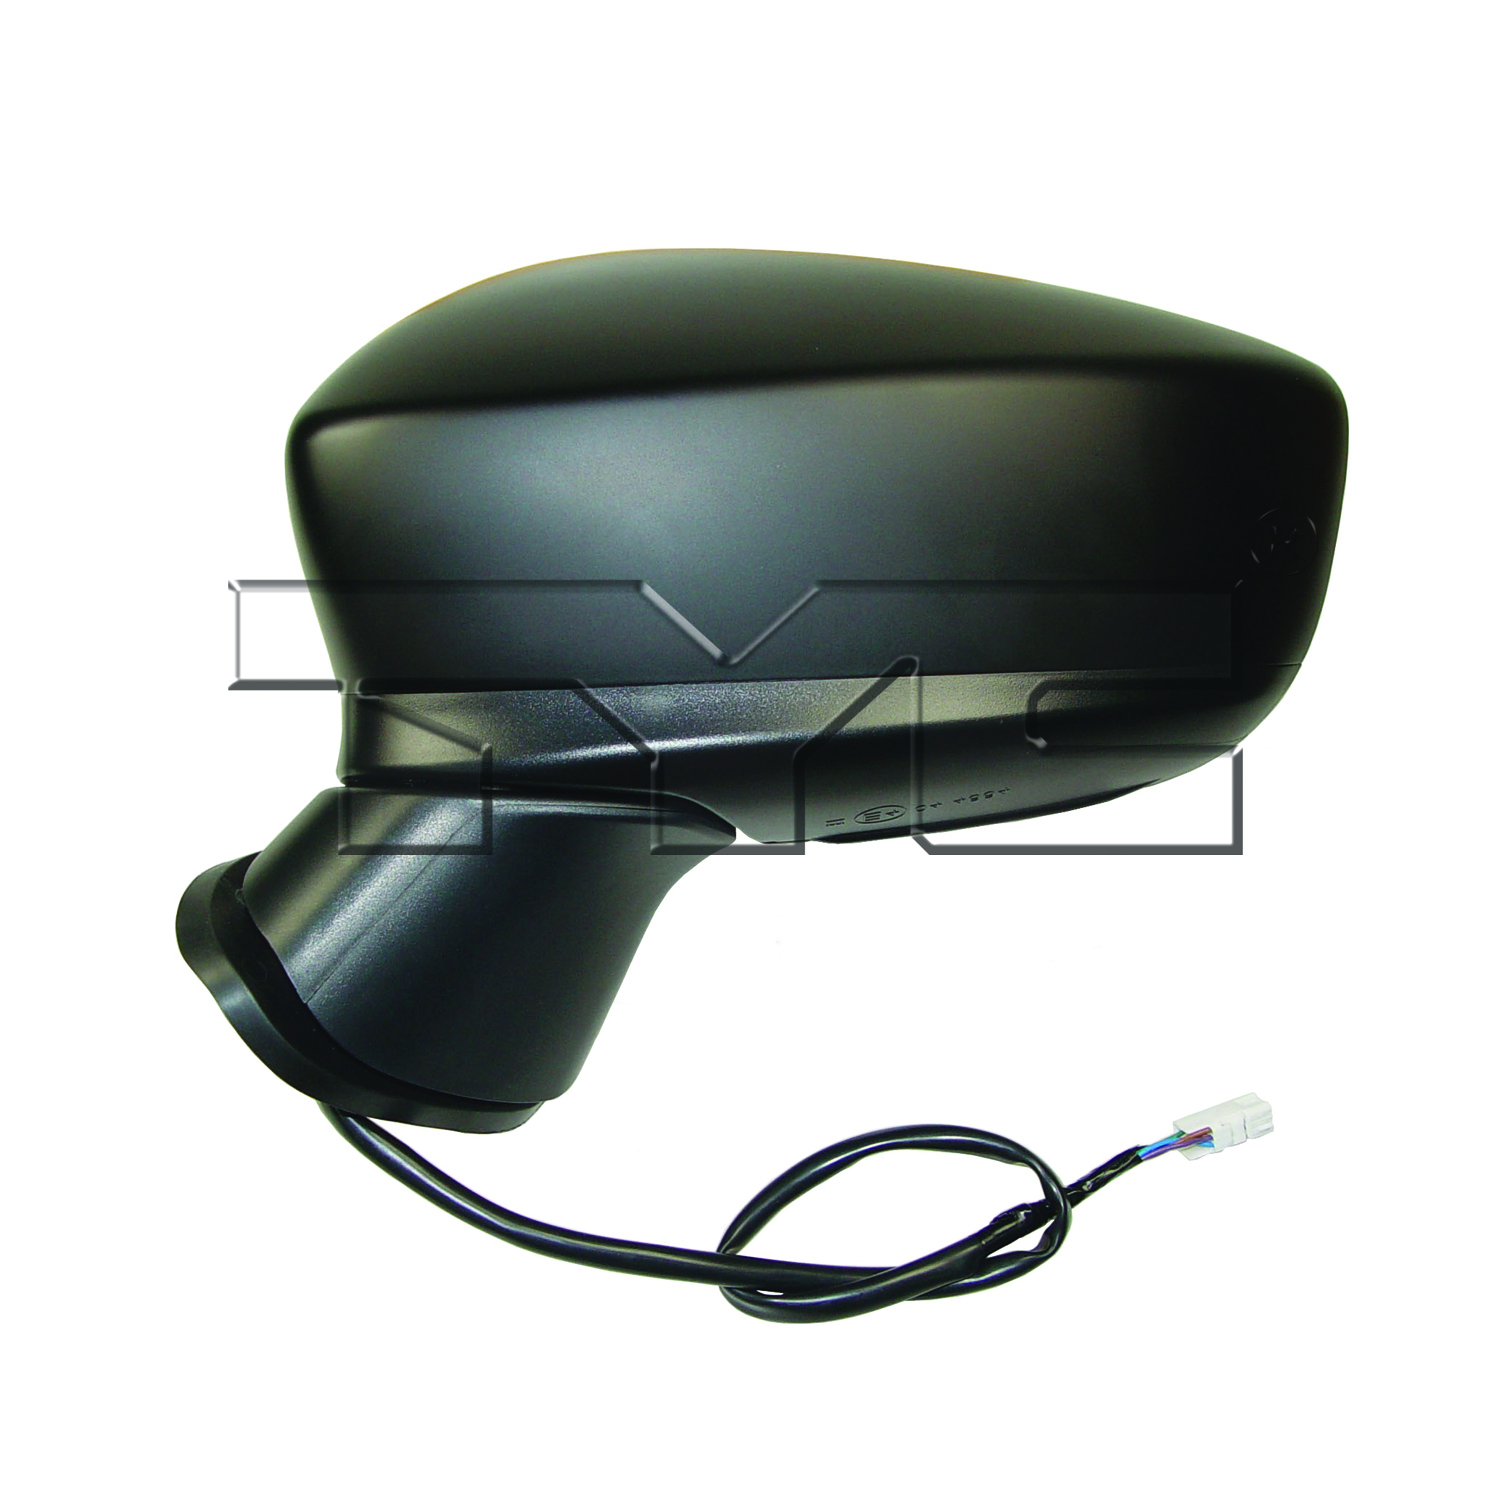 Aftermarket MIRRORS for MAZDA - 3, 3,14-15,LT Mirror outside rear view